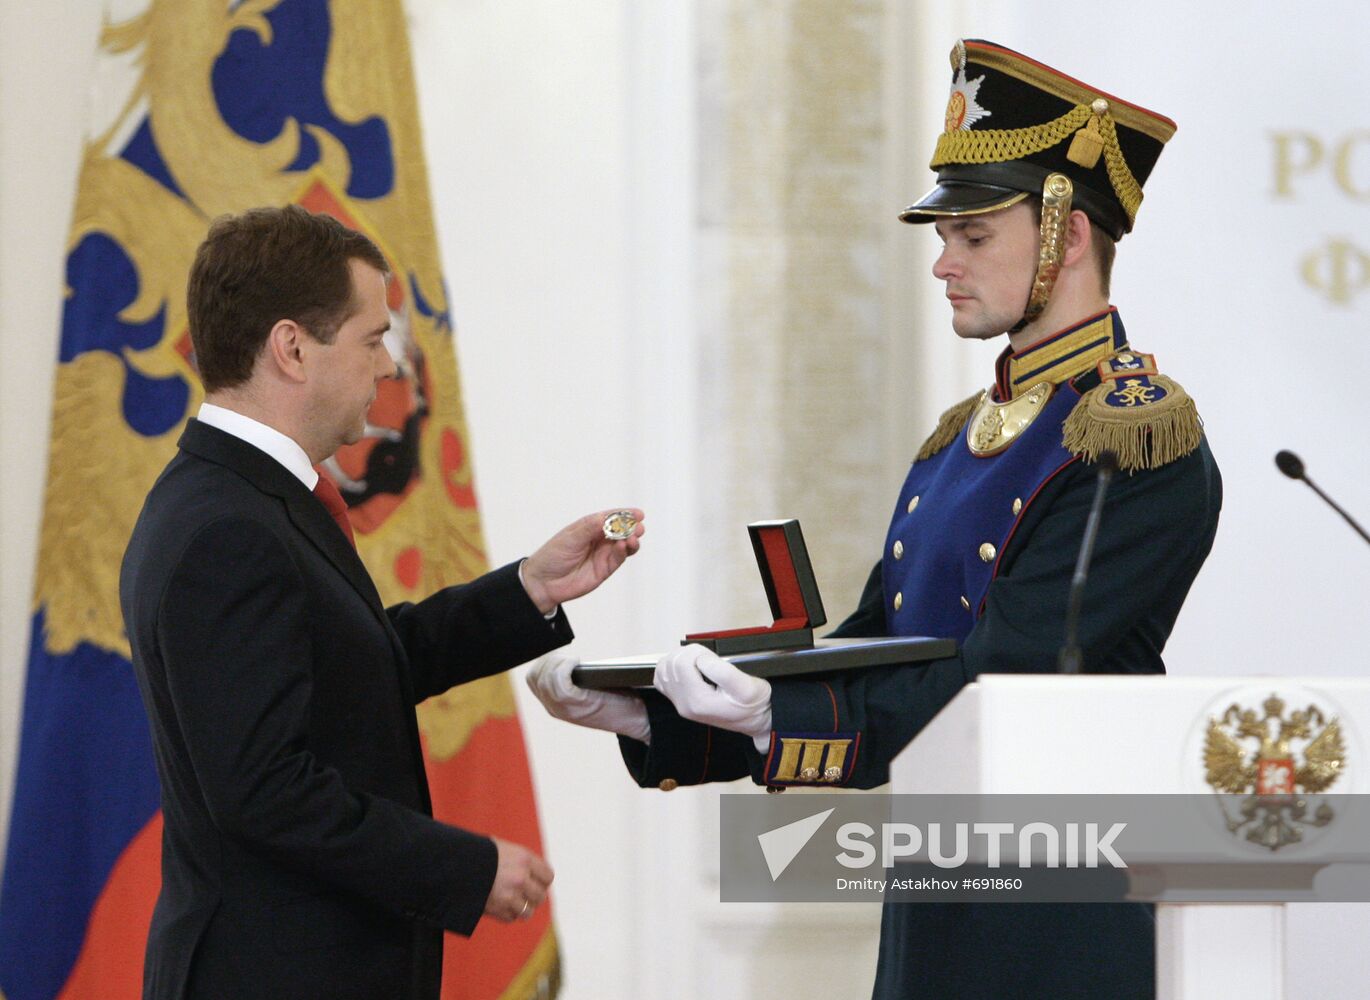 2009 State Awards ceremony at Moscow Kremlin